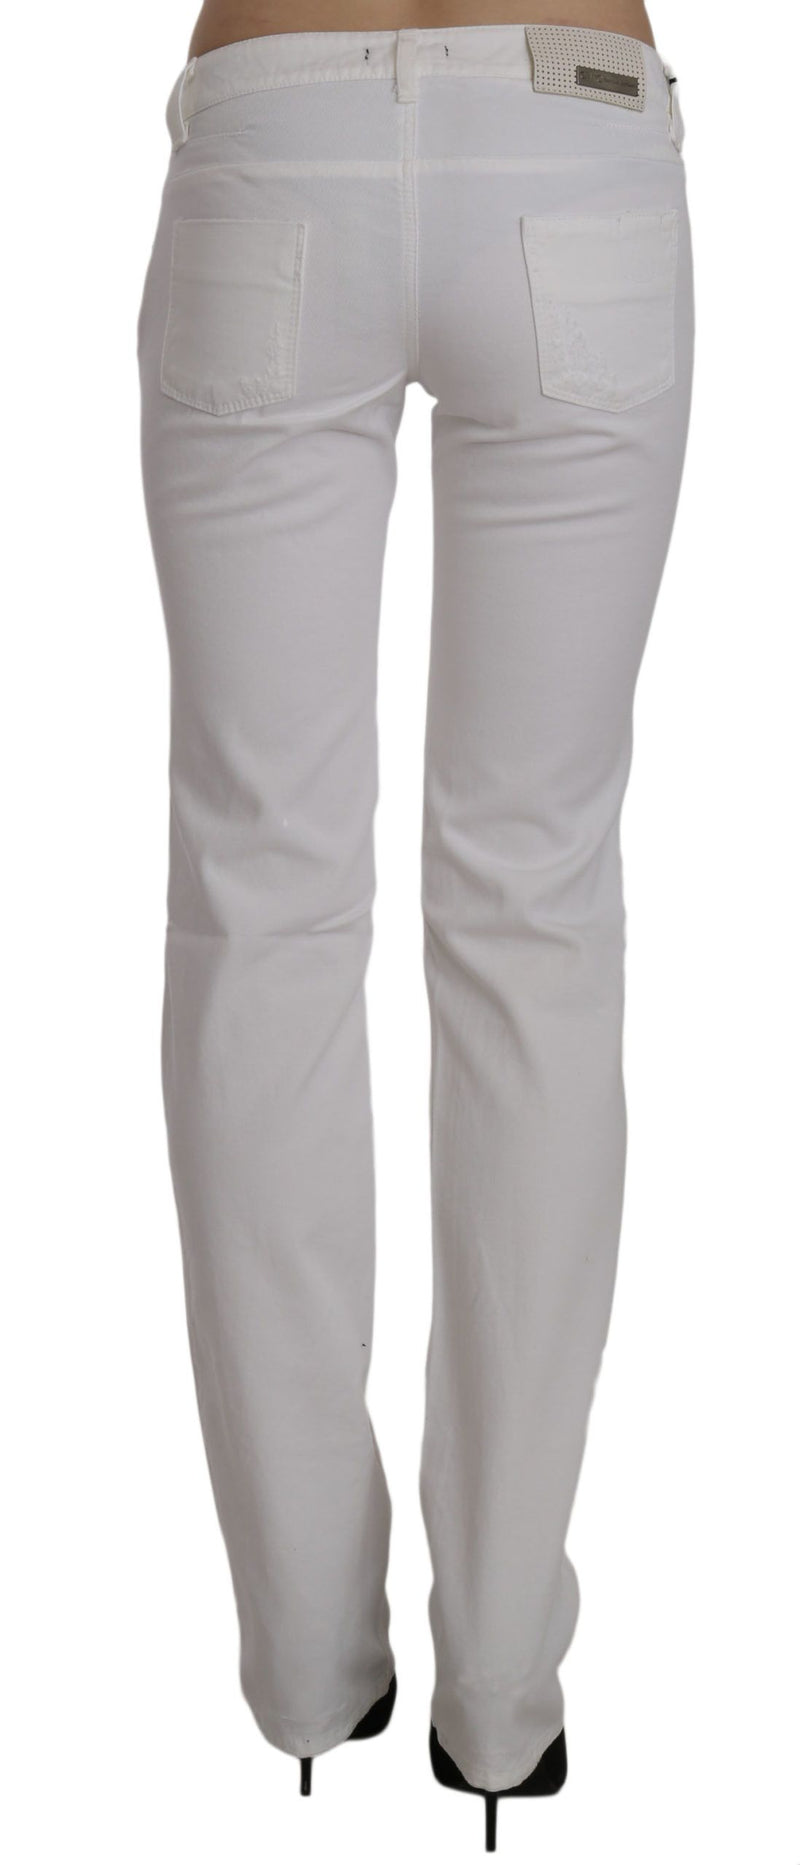 Costume National White Cotton Slim Fit Straight Jeans Women's Pants